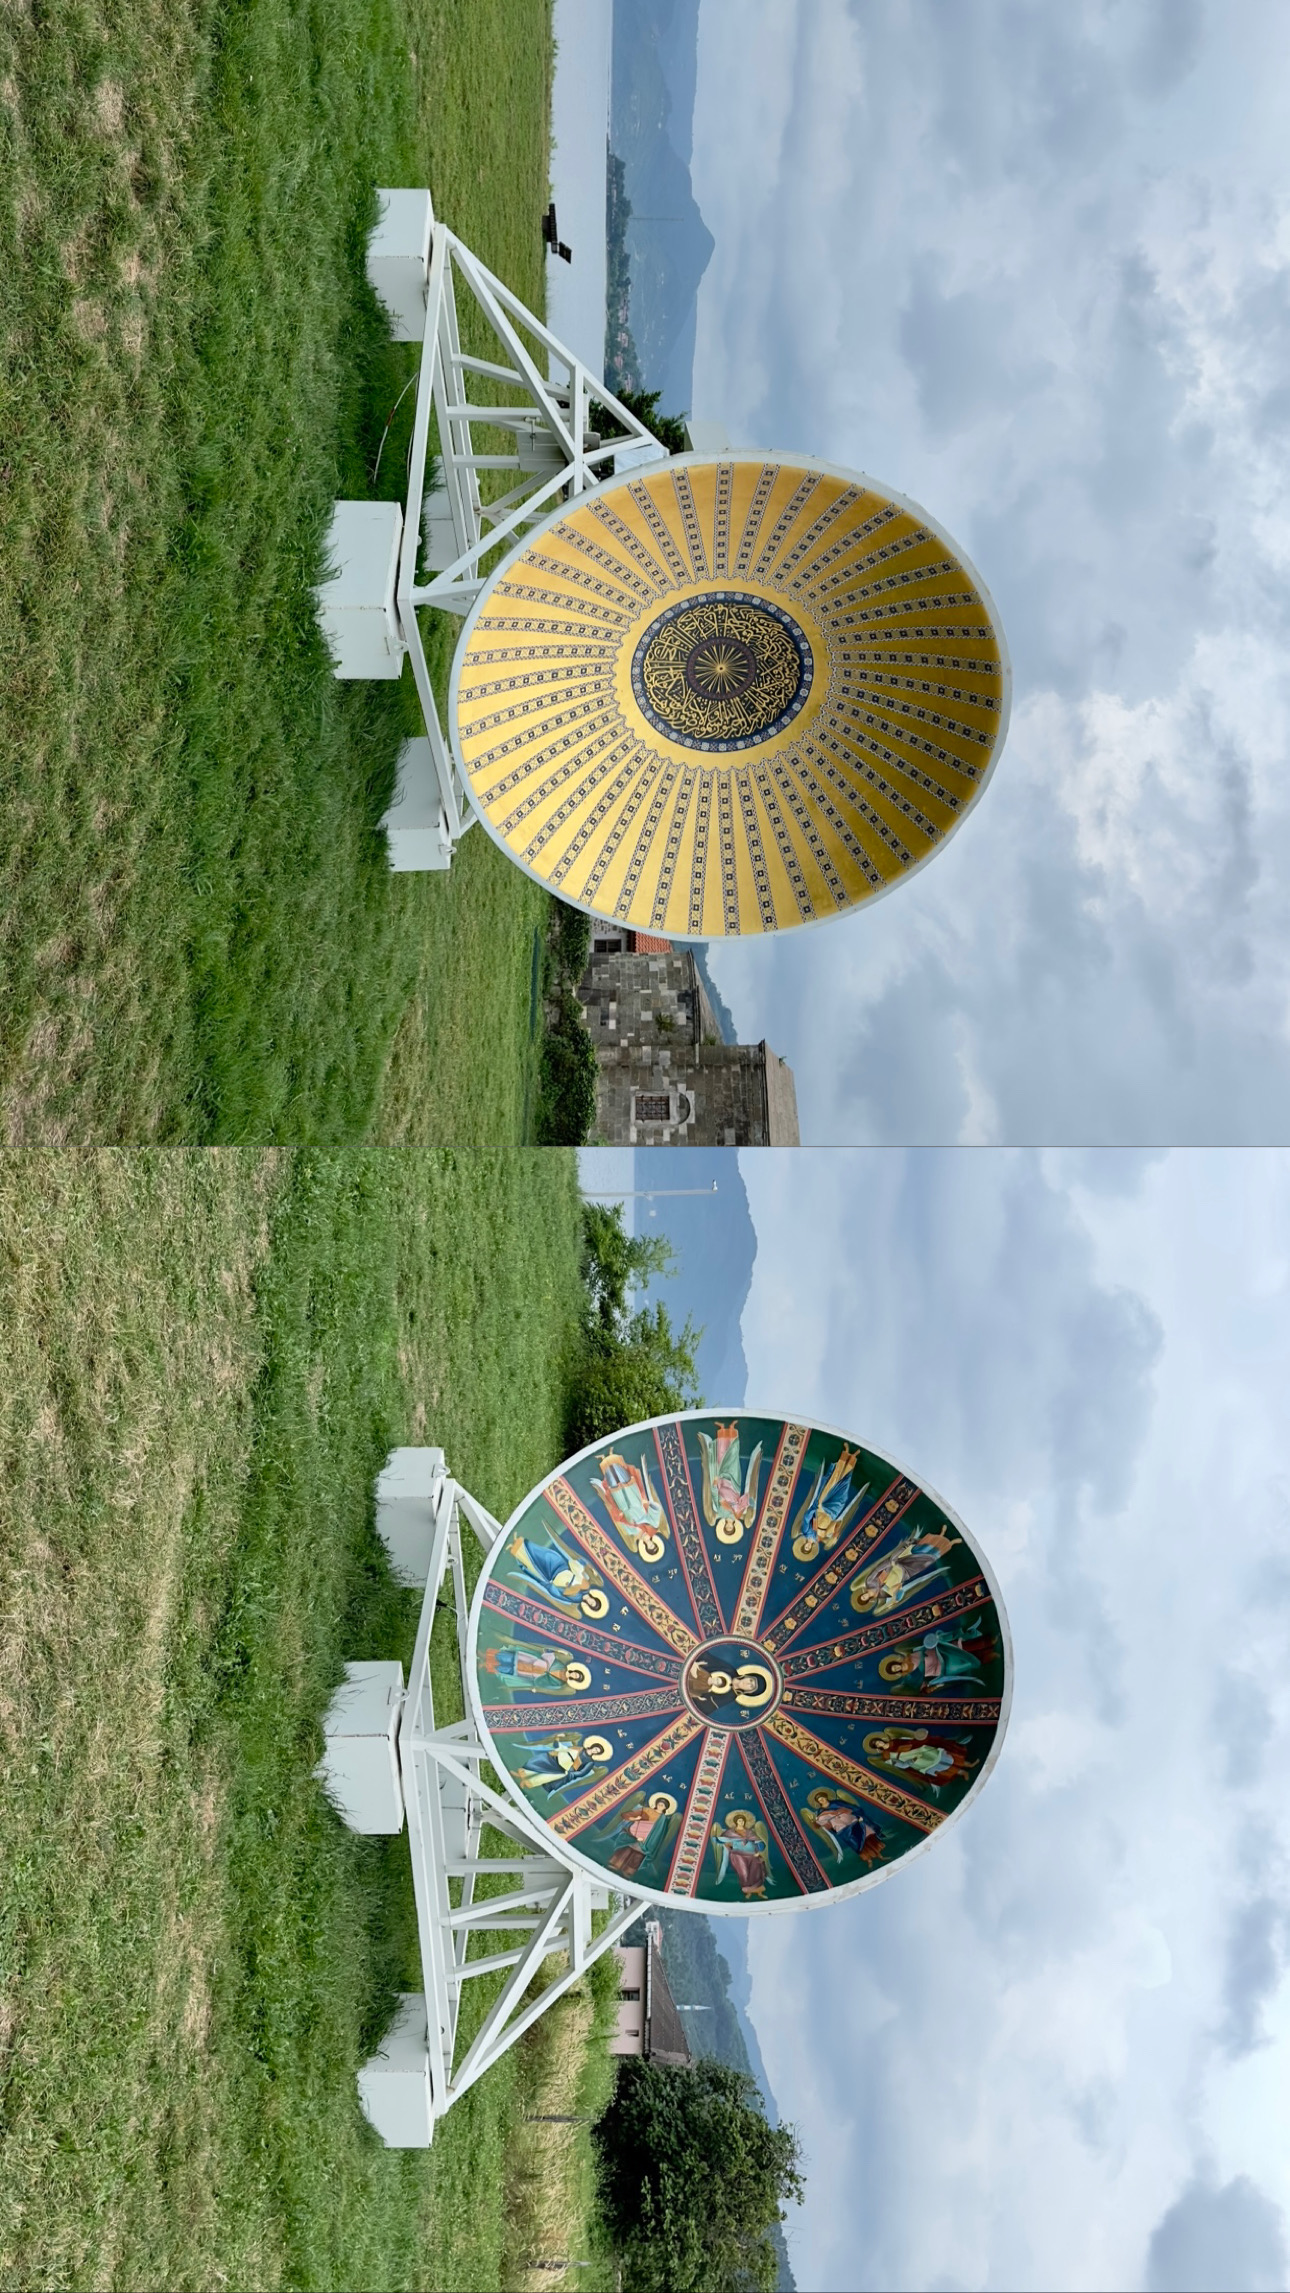 Throughout history, domes—the components of buildings pointing to the sky—have been identified as the source of spirituality and able to deliver the images, narratives, and messages of the skies. In this work, two large-sized satellite dishes whirling around their axes stand level with the audience and, with their controlled rotation, get in a loop akin to the movement of the planet, the sun, and the moon, formation of months and years. One of the dishes of these two technical systems holds the ornaments and the Arabic calligraphy of the dome of Hagia Sophia. The other one carries the dome of parecclesion of Chora Monastery depicting the Virgin and Child and the angels. The forms and the ornaments of these small representations of the vault of heaven have been adapted to the antenna systems used to communicate, observe, and receive signals. The micro vaults of heaven are placed next to people instead of above. They unite with the sky in the open air. This work directs people’s gaze to outer space, the unknown, and the infinitude of imagination and reflects hope about the future.